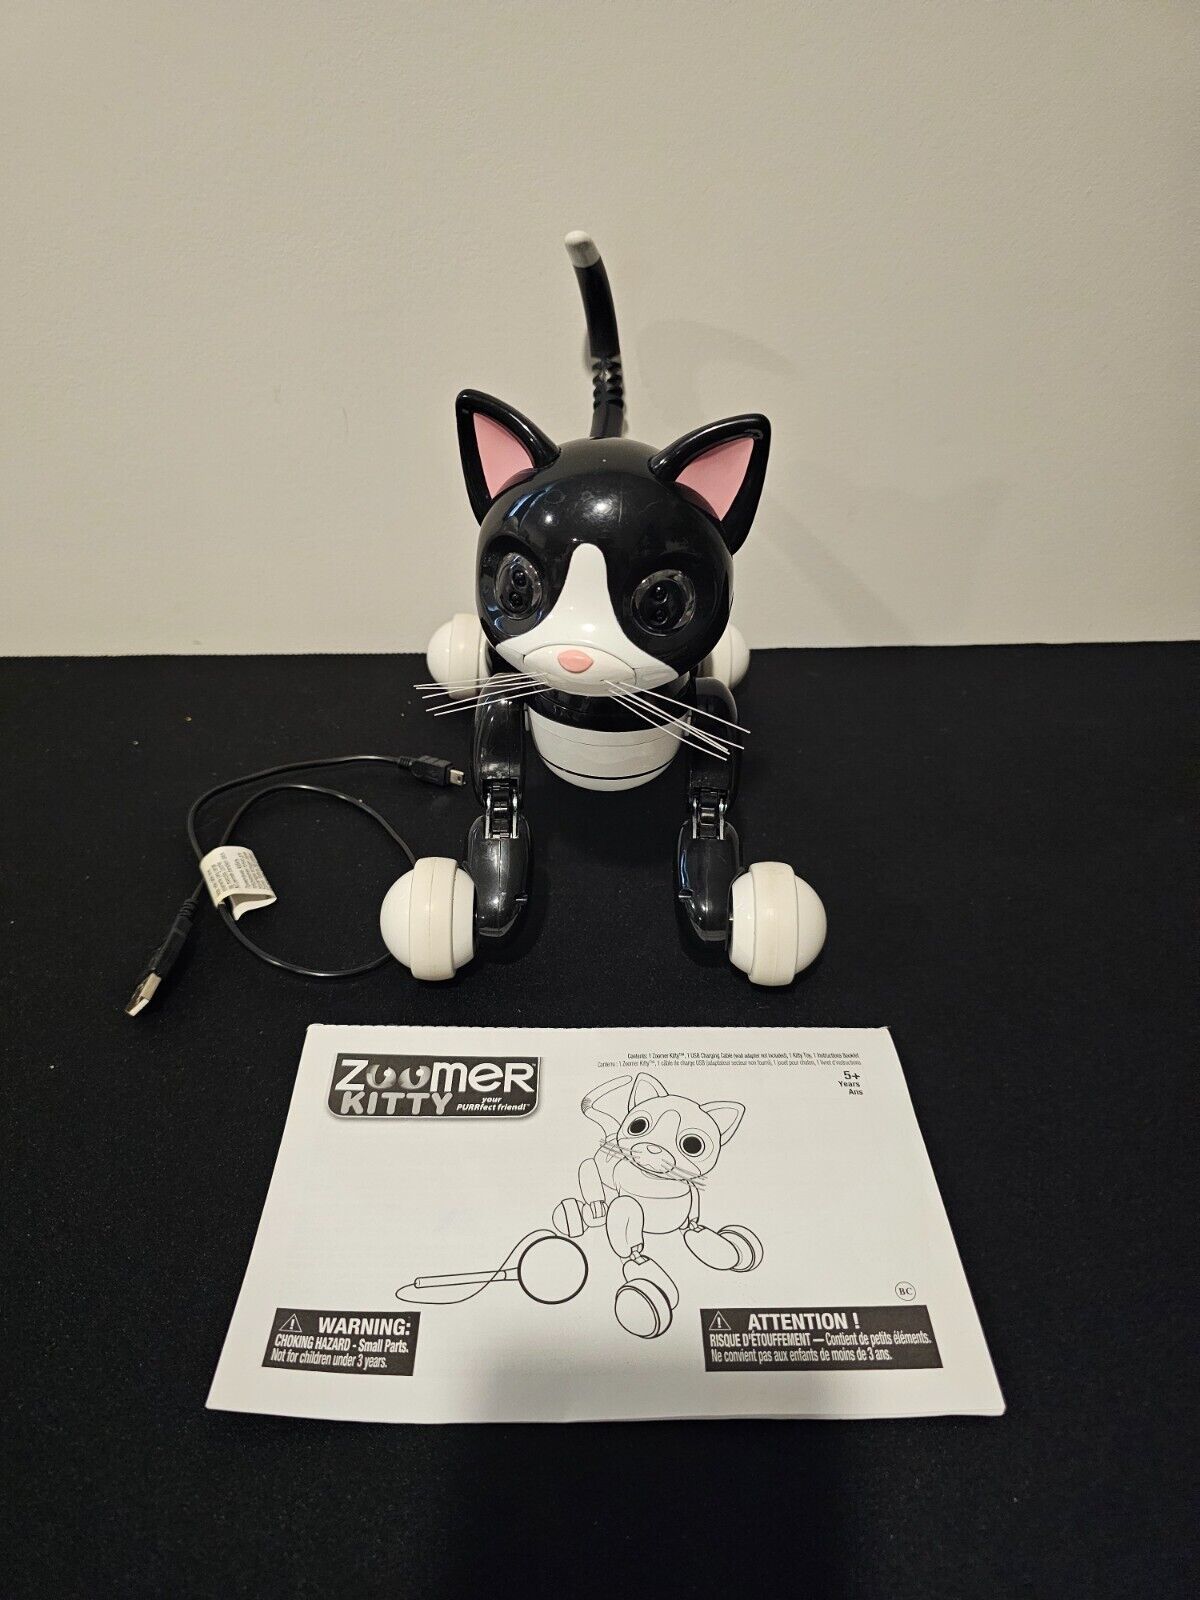 Primary image for Zoomer Kitty Black Tuxedo Robot Cat Interactive Toy w/ Charging Cable & Manual!